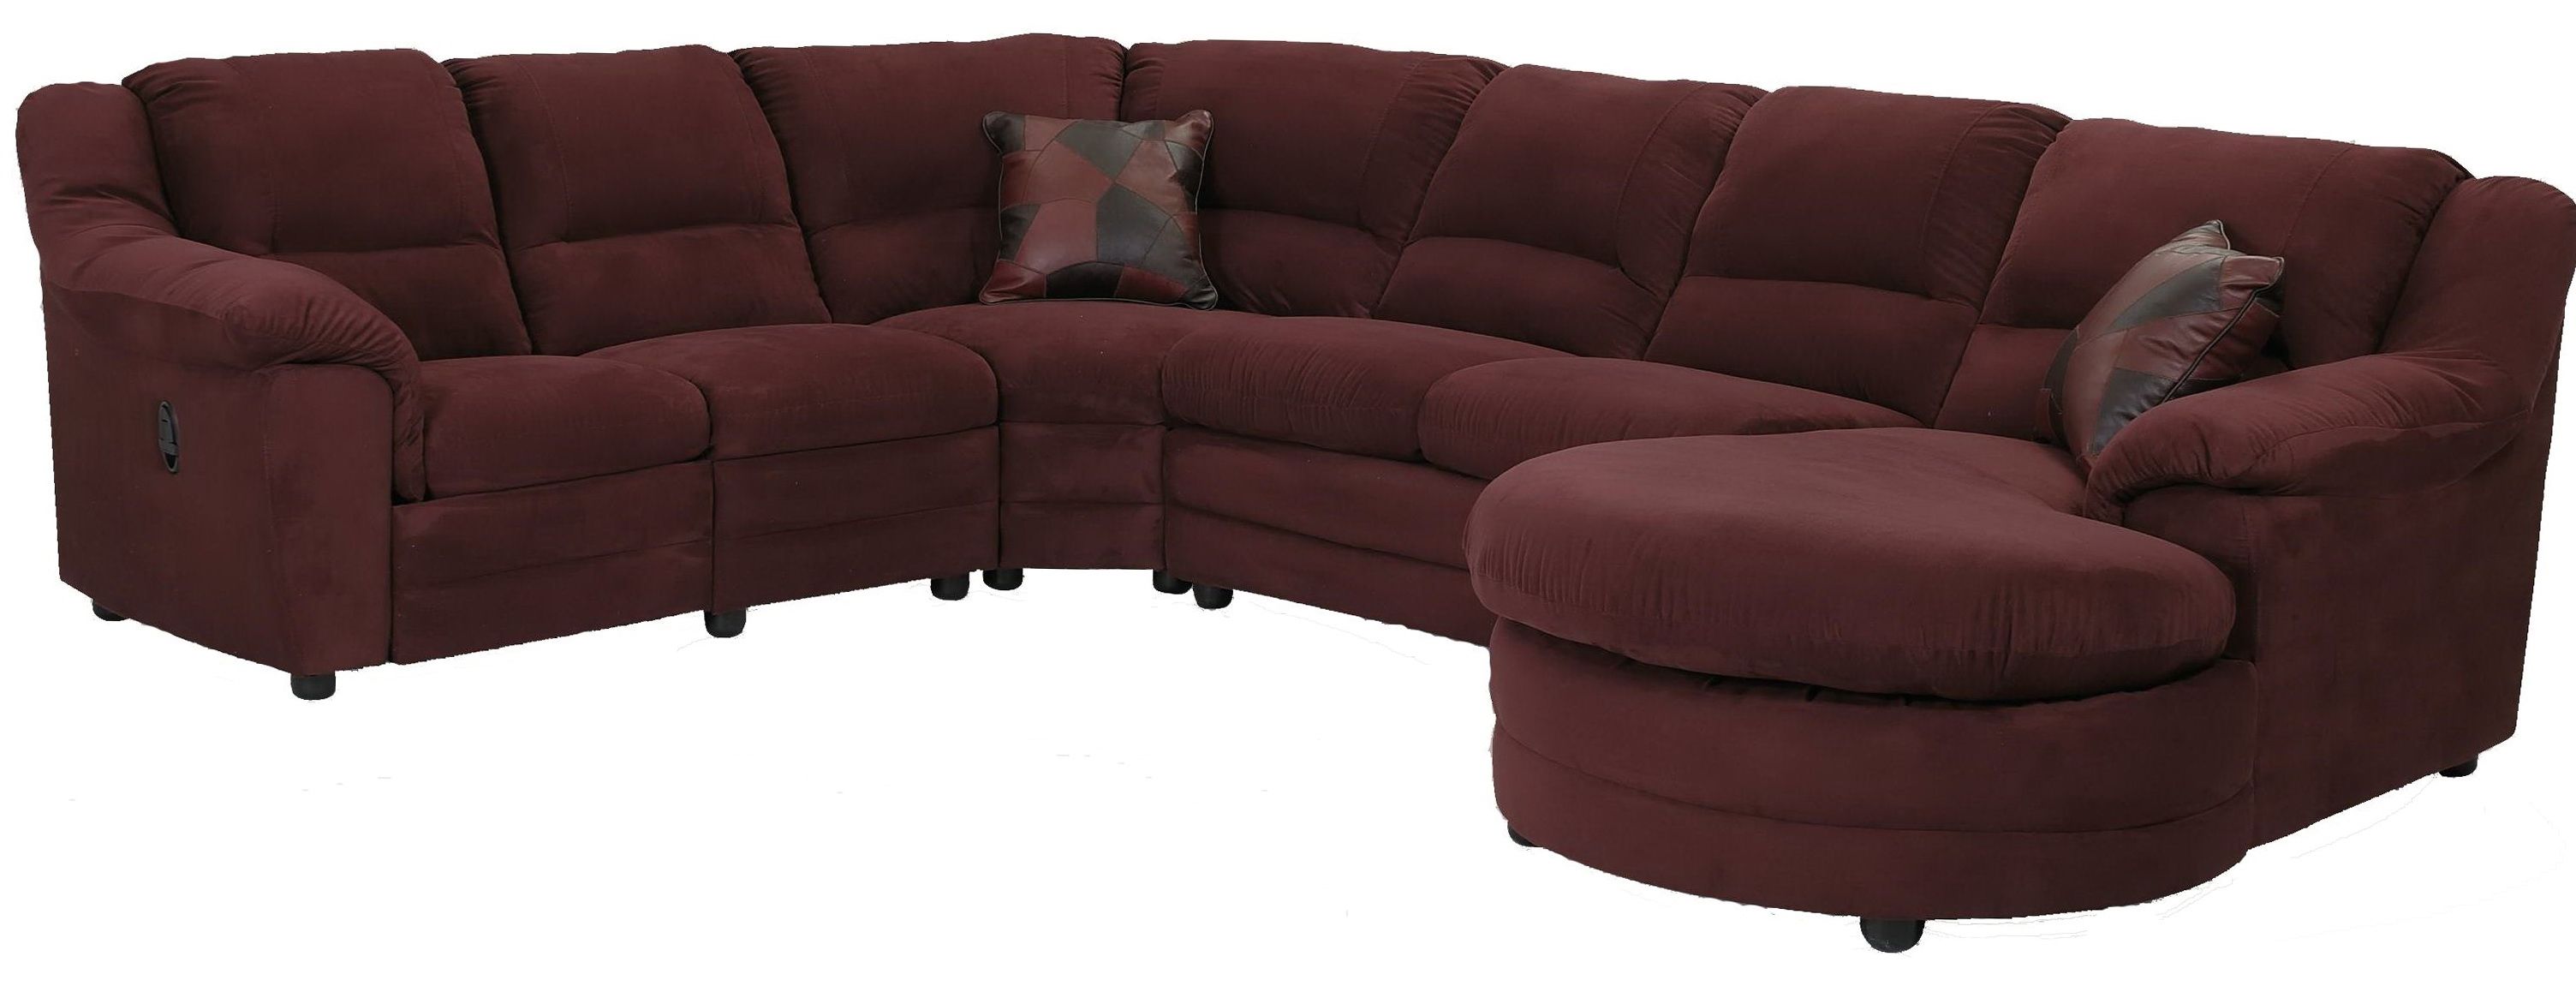 Most Popular Oversized Sectional Couch In Maroon Color With Circular Chaise For Sectional Sofas With Chaise Lounge (Photo 11 of 15)